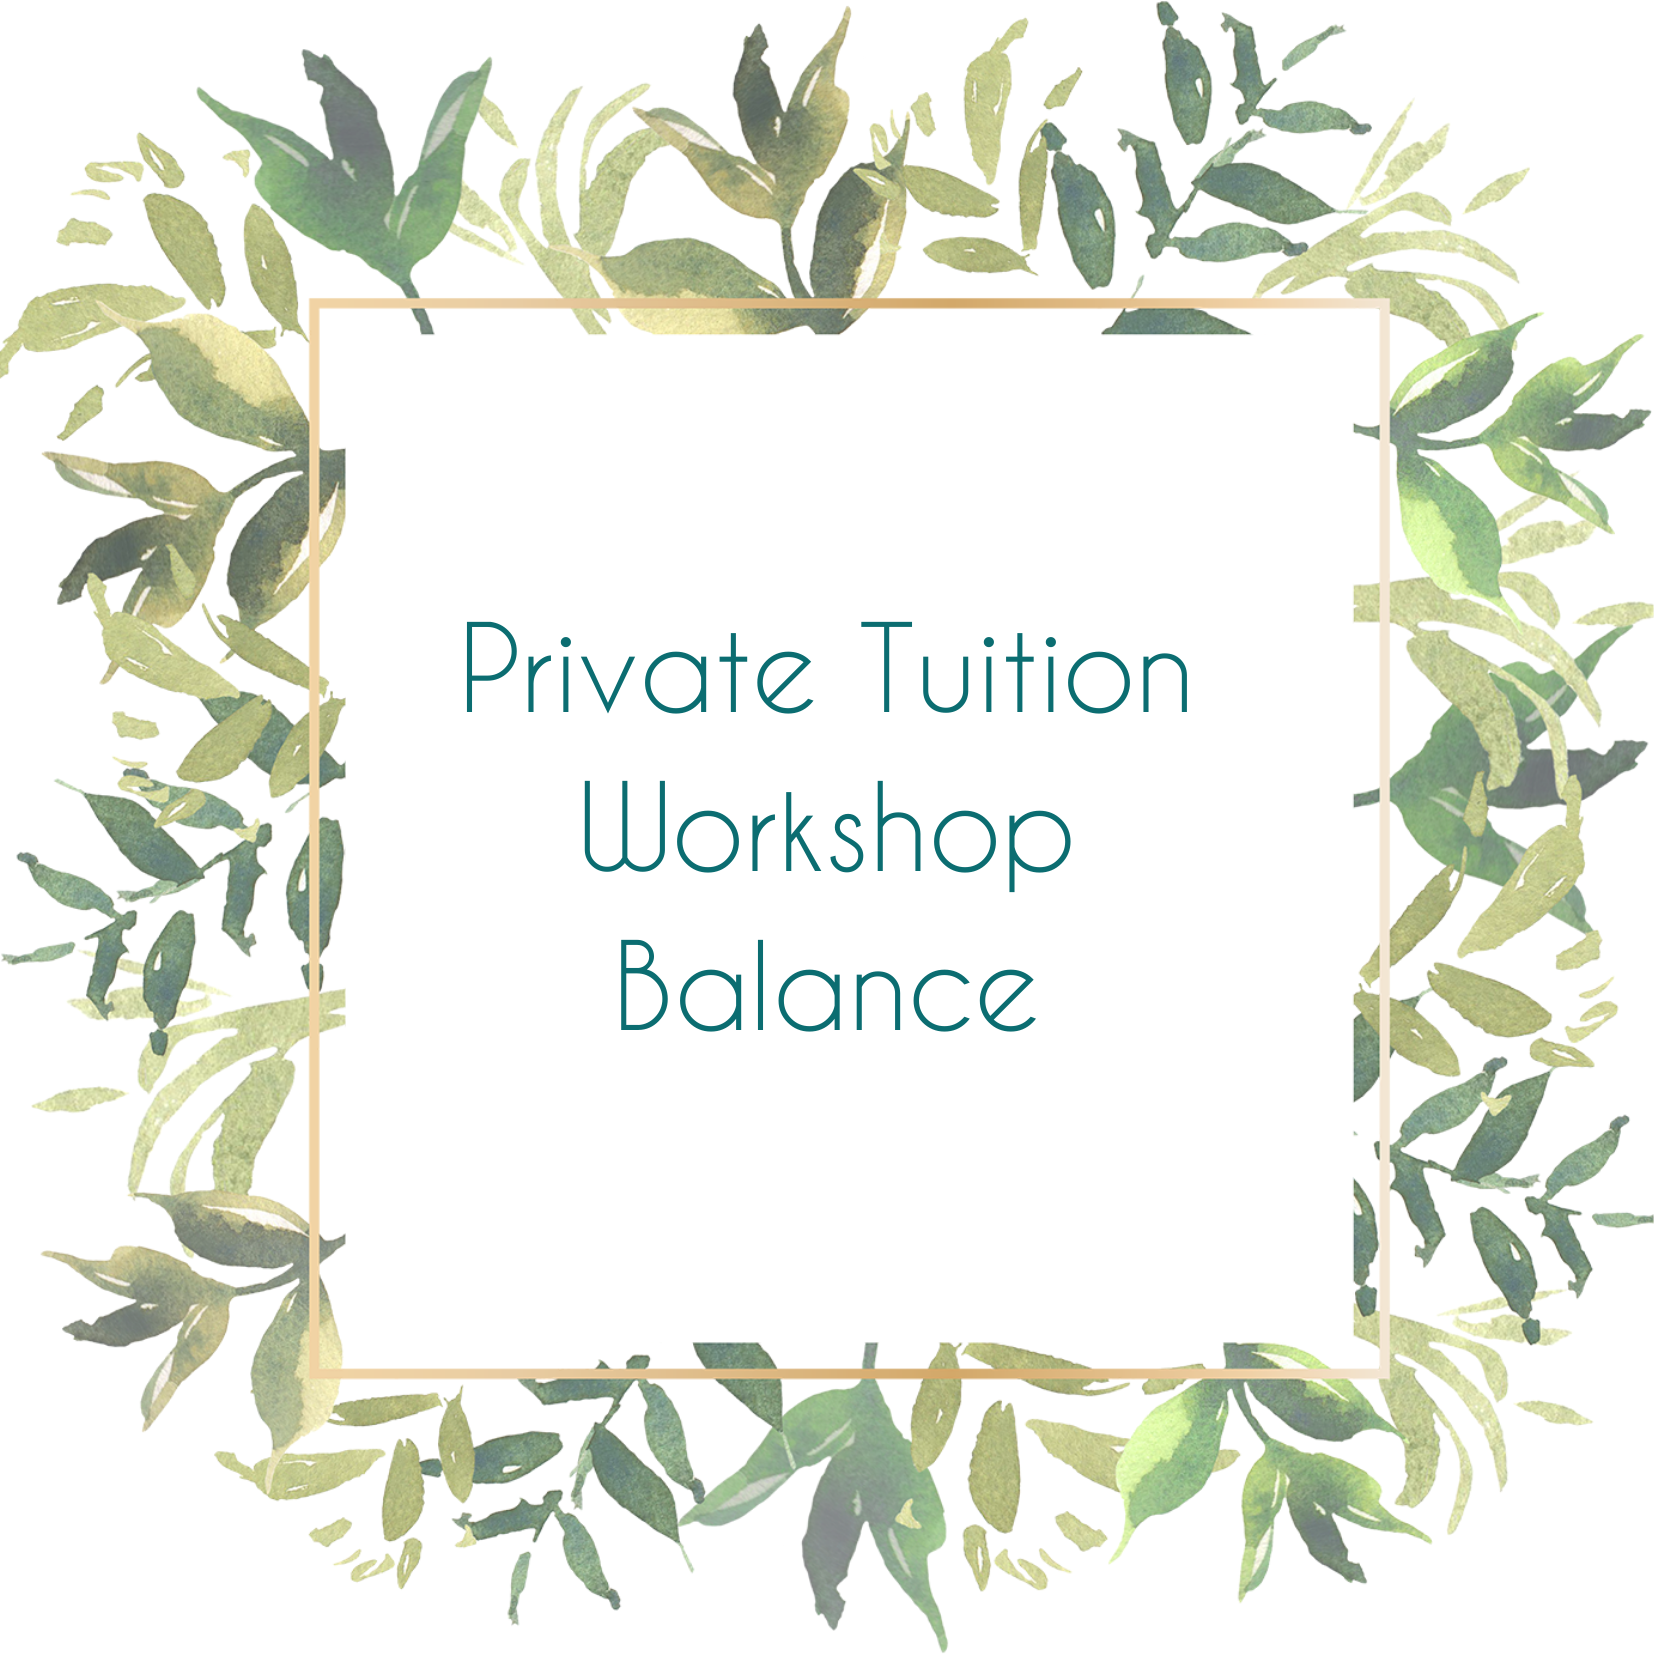 Private Tuition - 1 Day - Per Person - Balance Payment, Workshop, Small Dog Silver